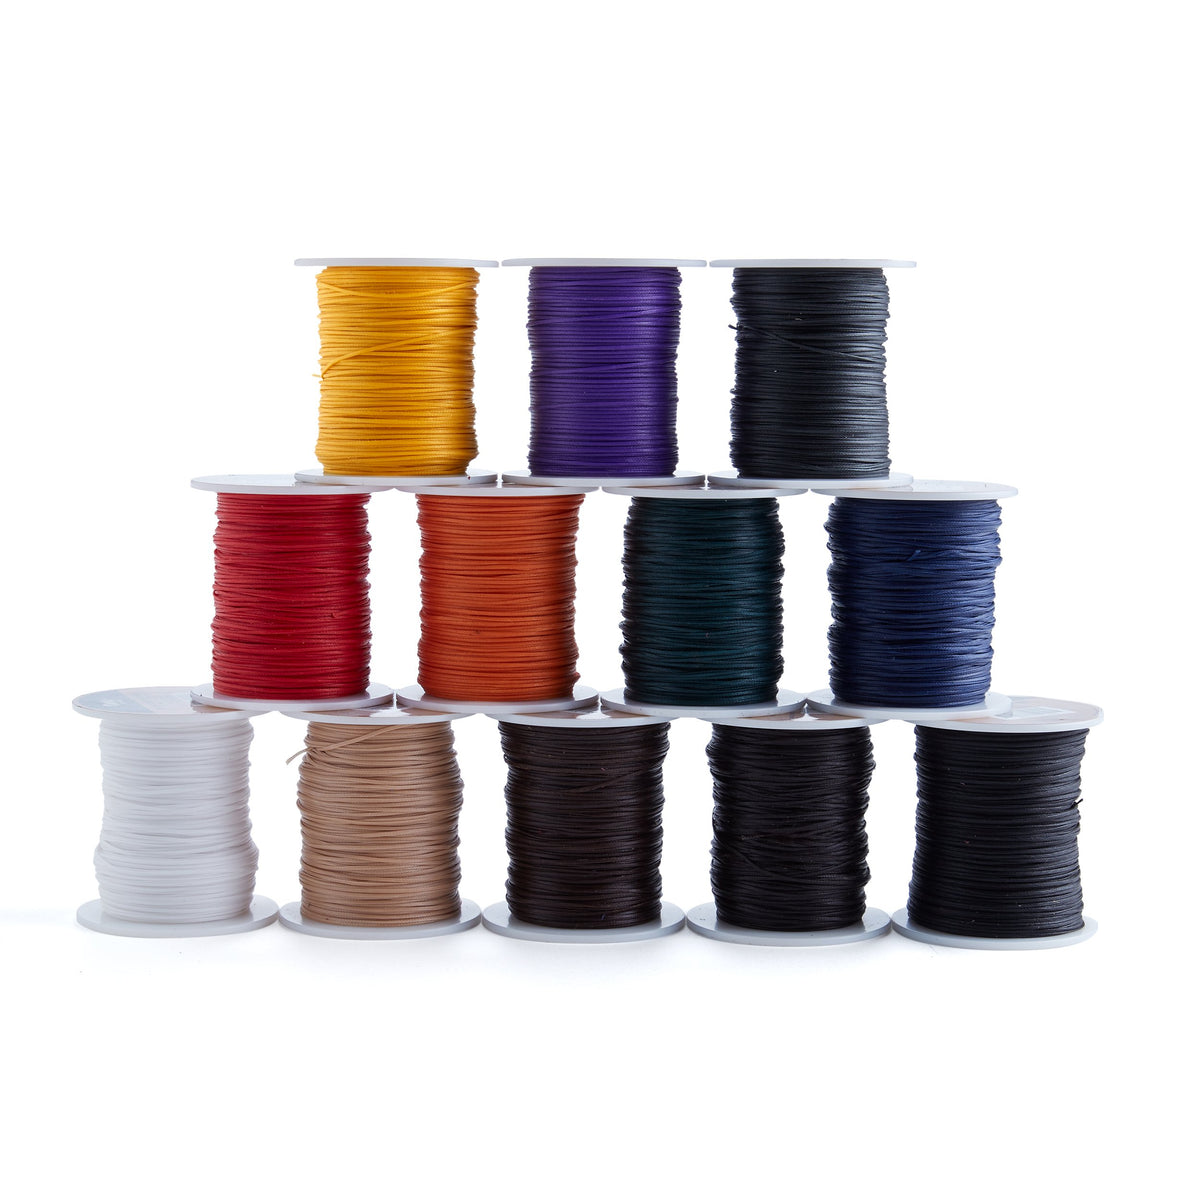 Ritza Tiger Hand Sewing Thread (0.6mm, 0.8mm, 1.0mm) – Hand and